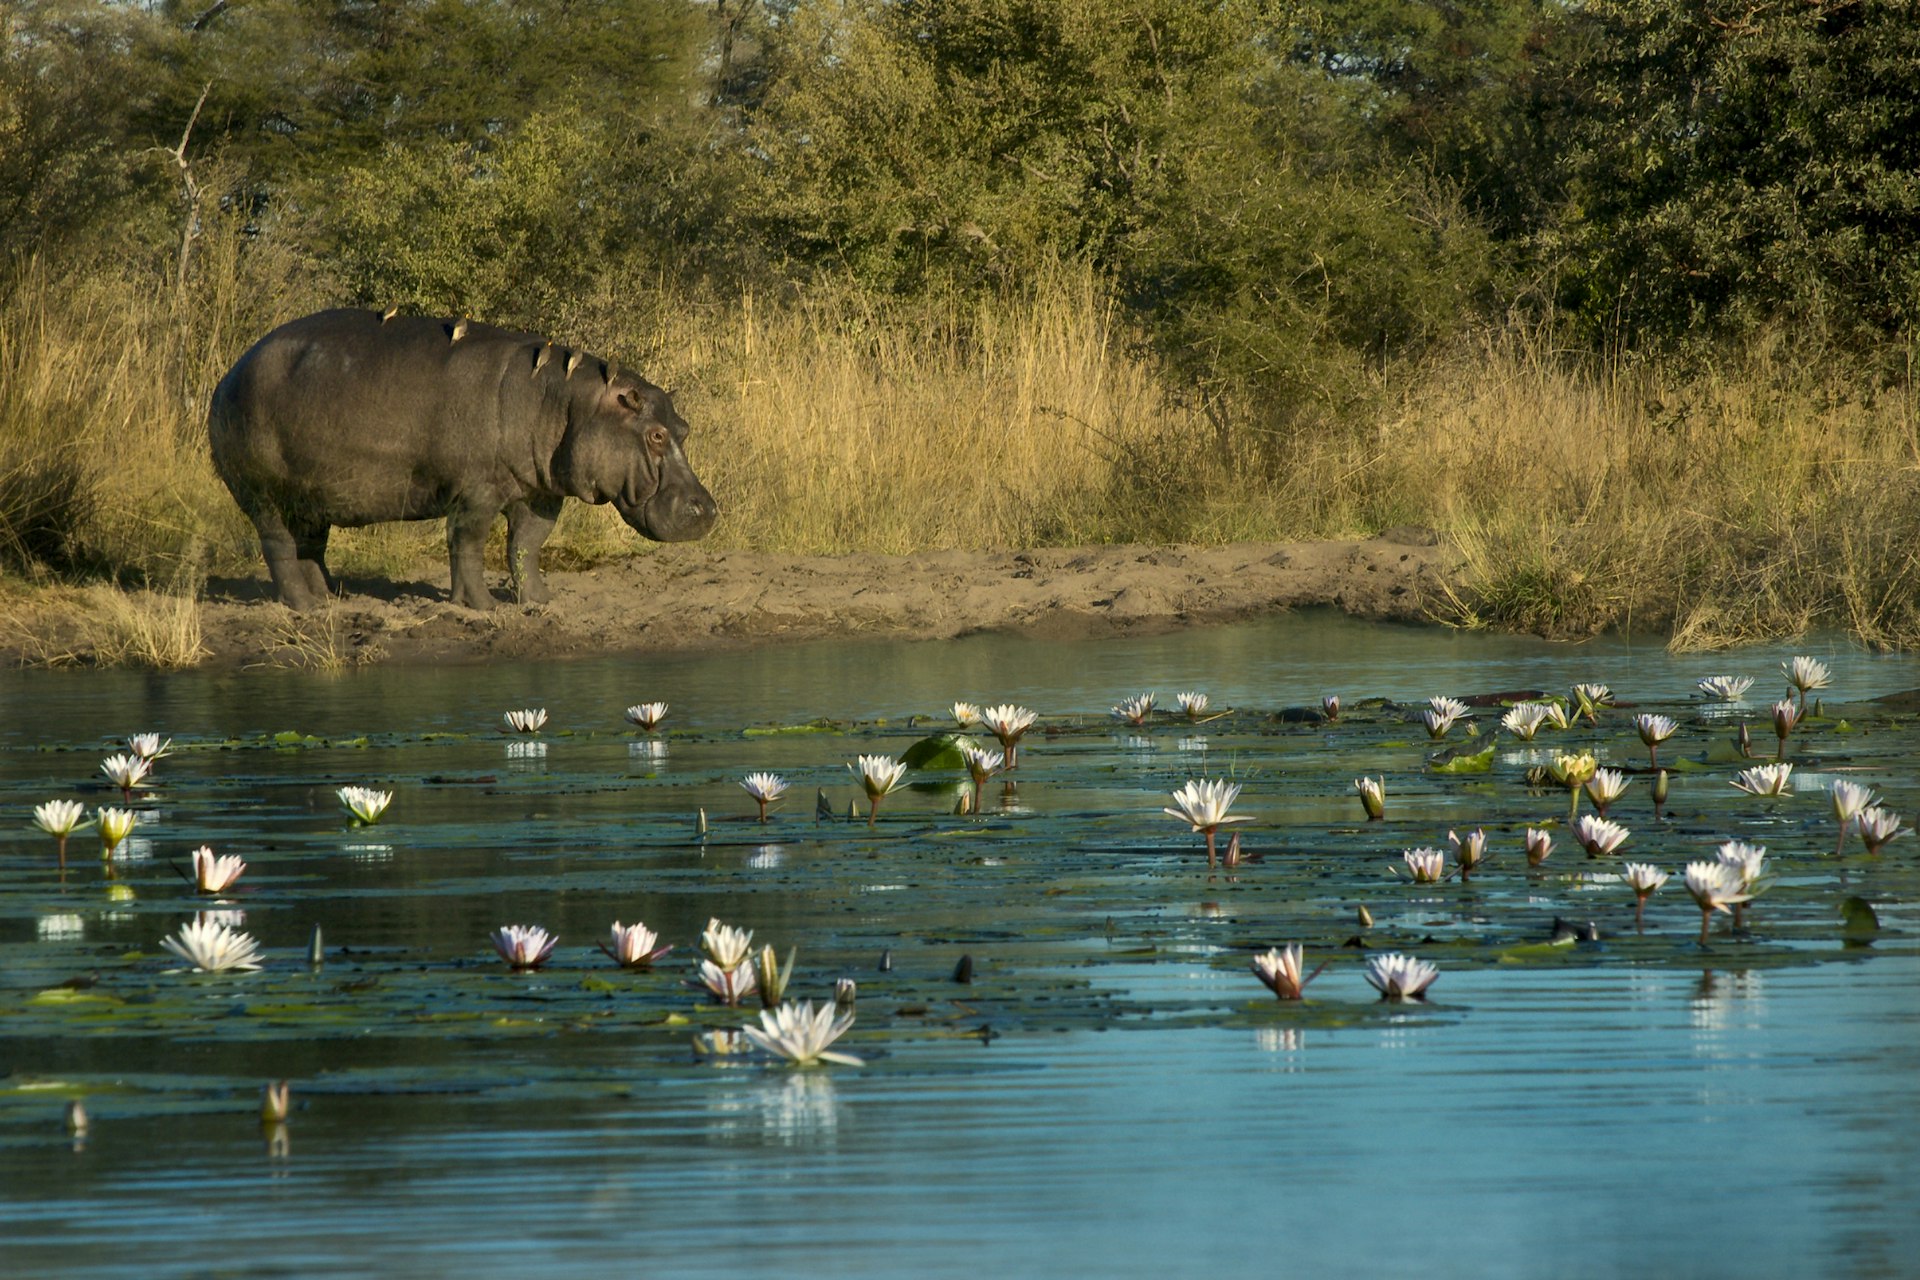 A hippopotamus standing on a riverbank with birds resting on its back looks at the river with flowers floating in the water